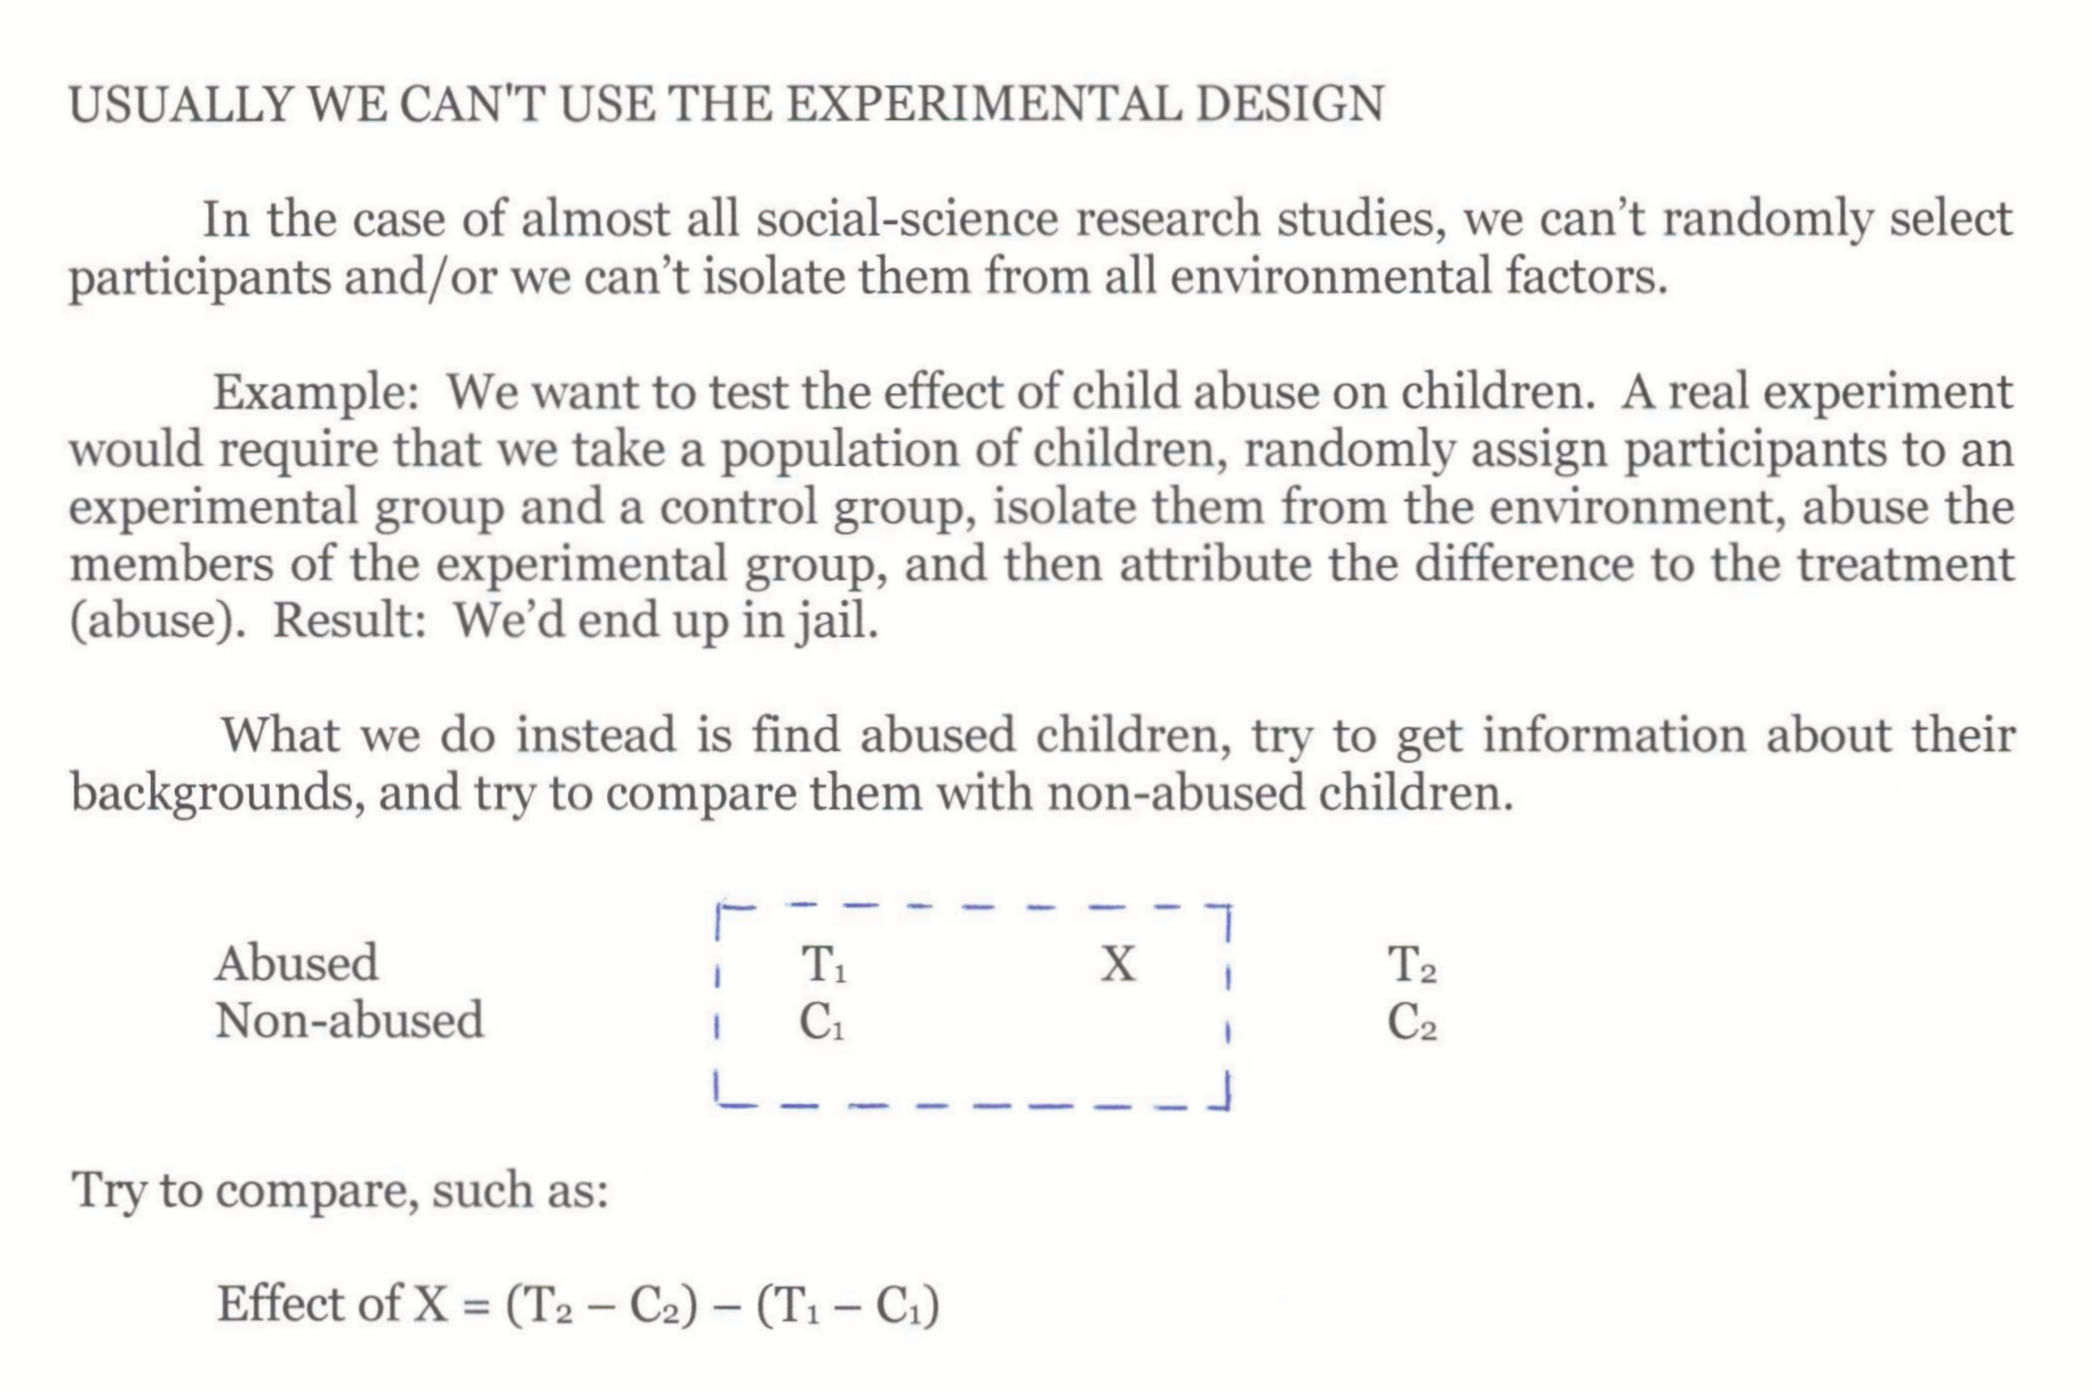 Social scientists often can't use the experimental design